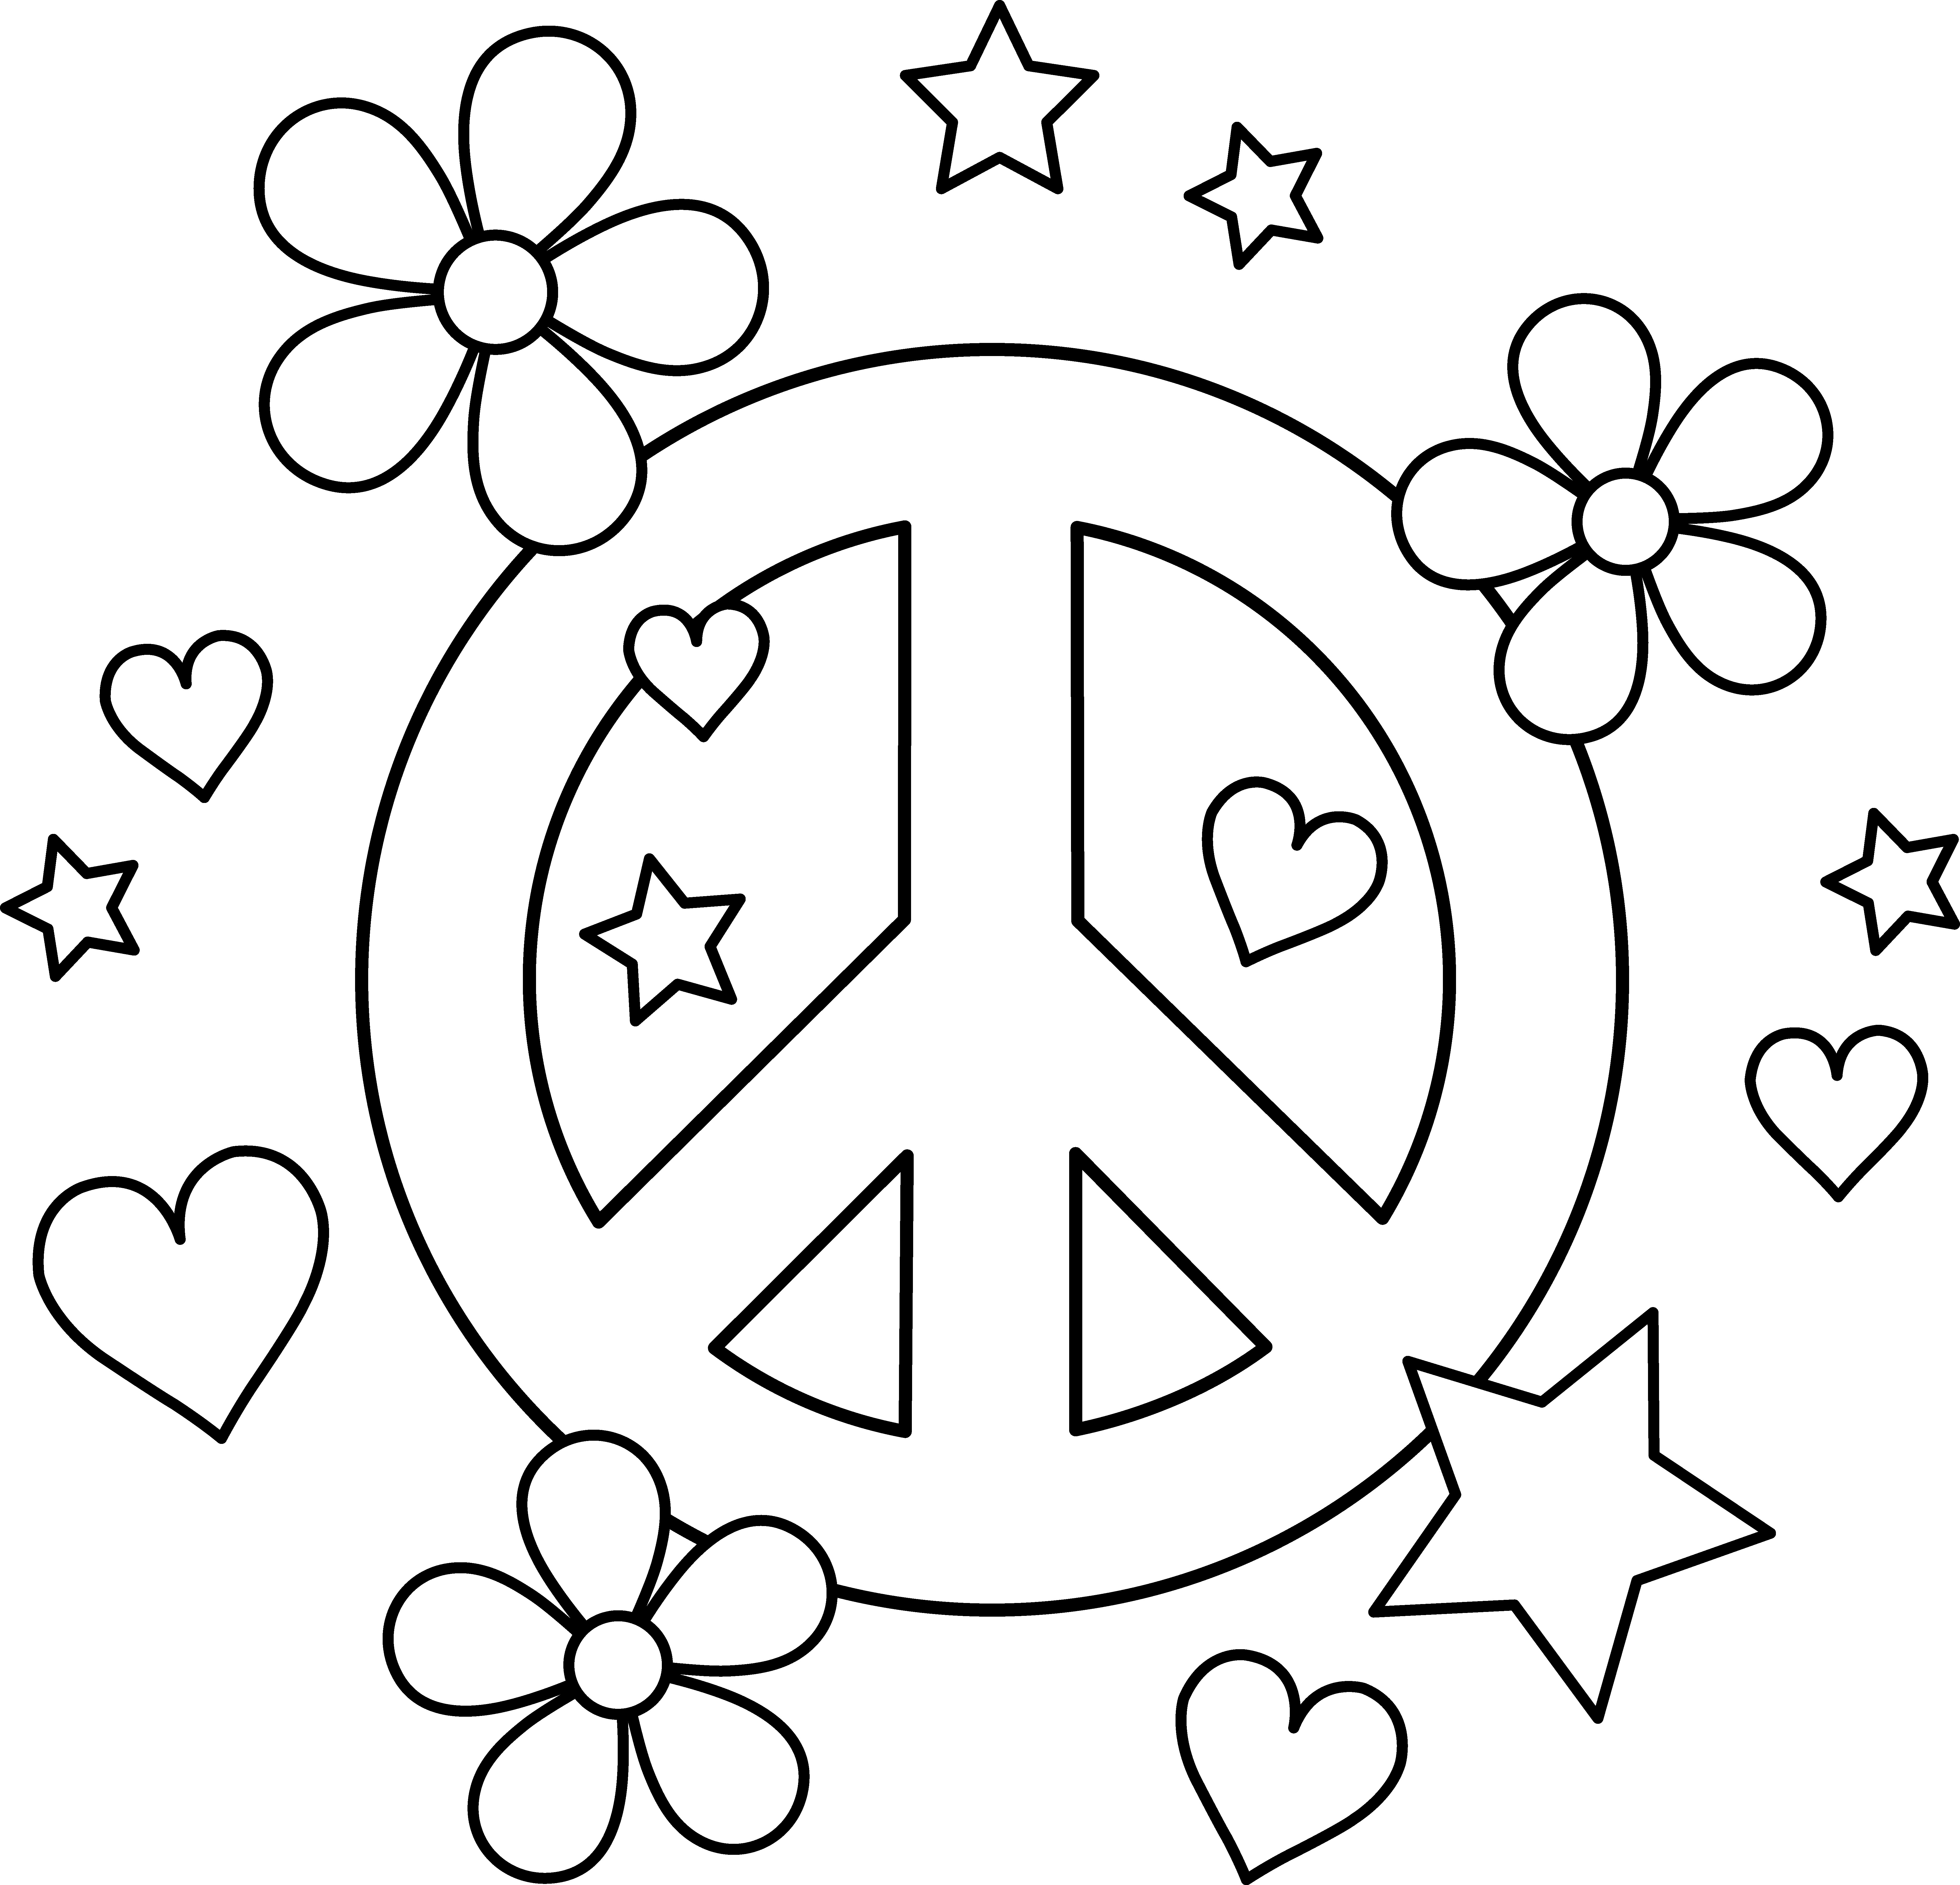 Peace Sign Coloring Pages For Adults
 7 Best of Peace And Love Coloring Pages Printable